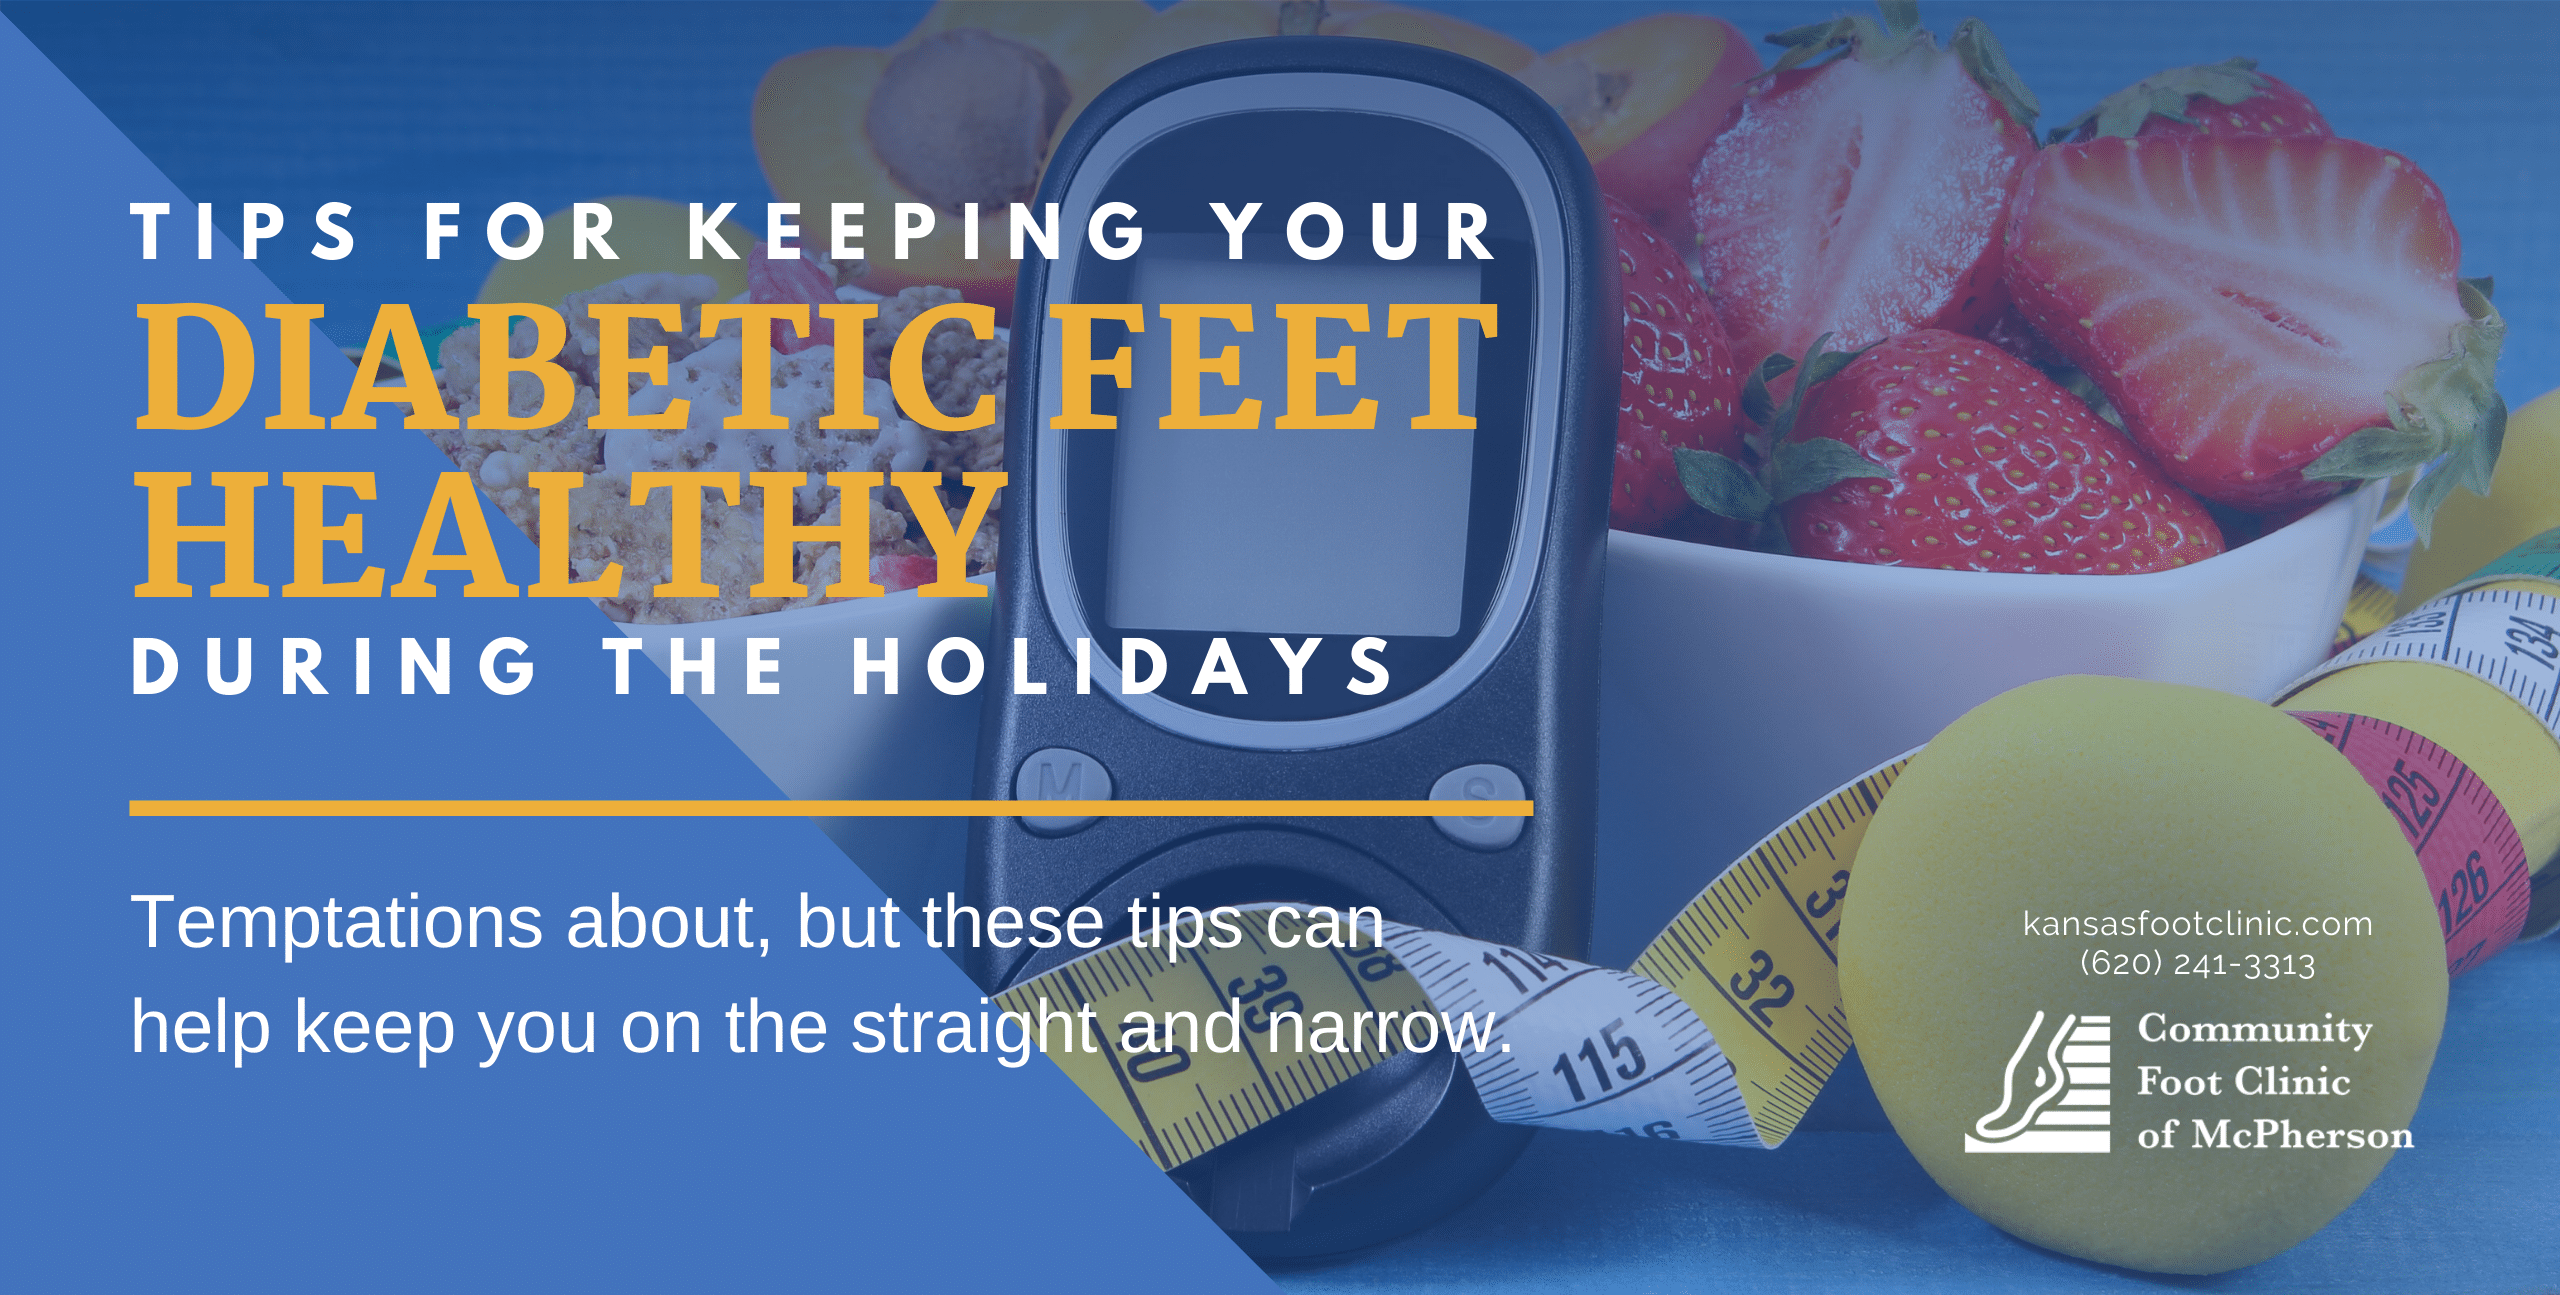 Keep Diabetic feet healthy during the holidays